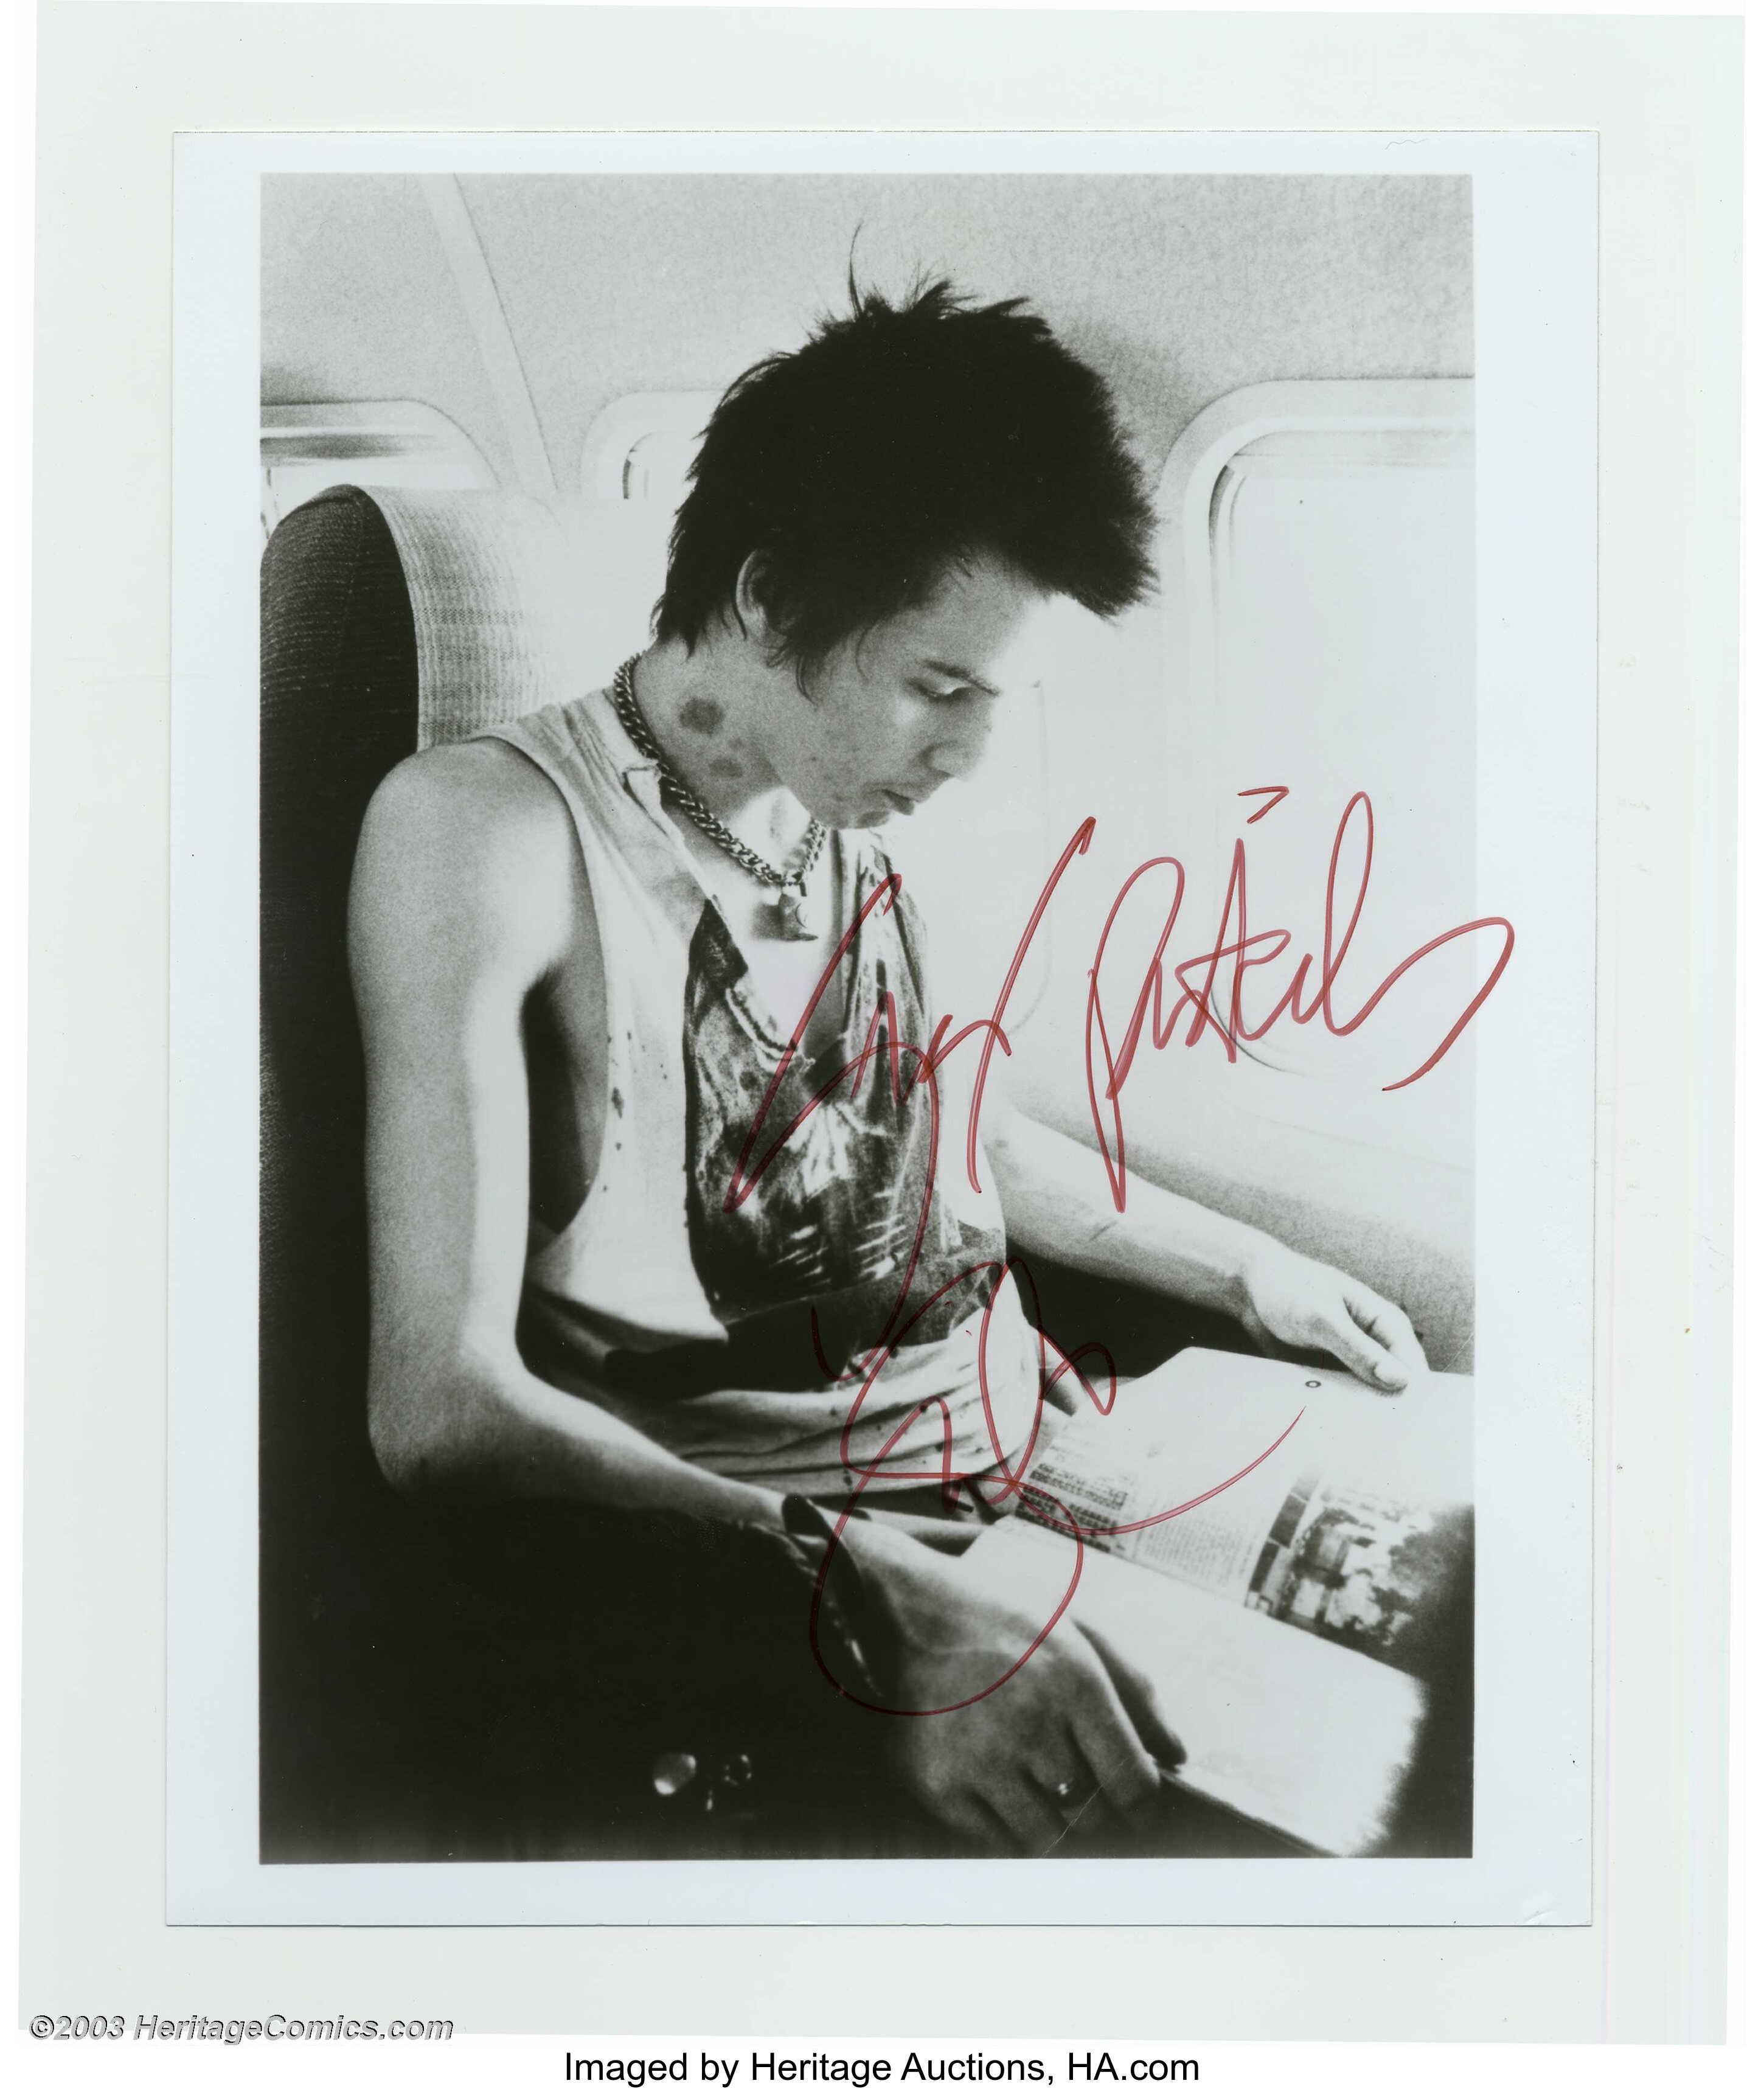 Sex Pistols - Sid Vicious Autographed 8 x 10 (undated). This is